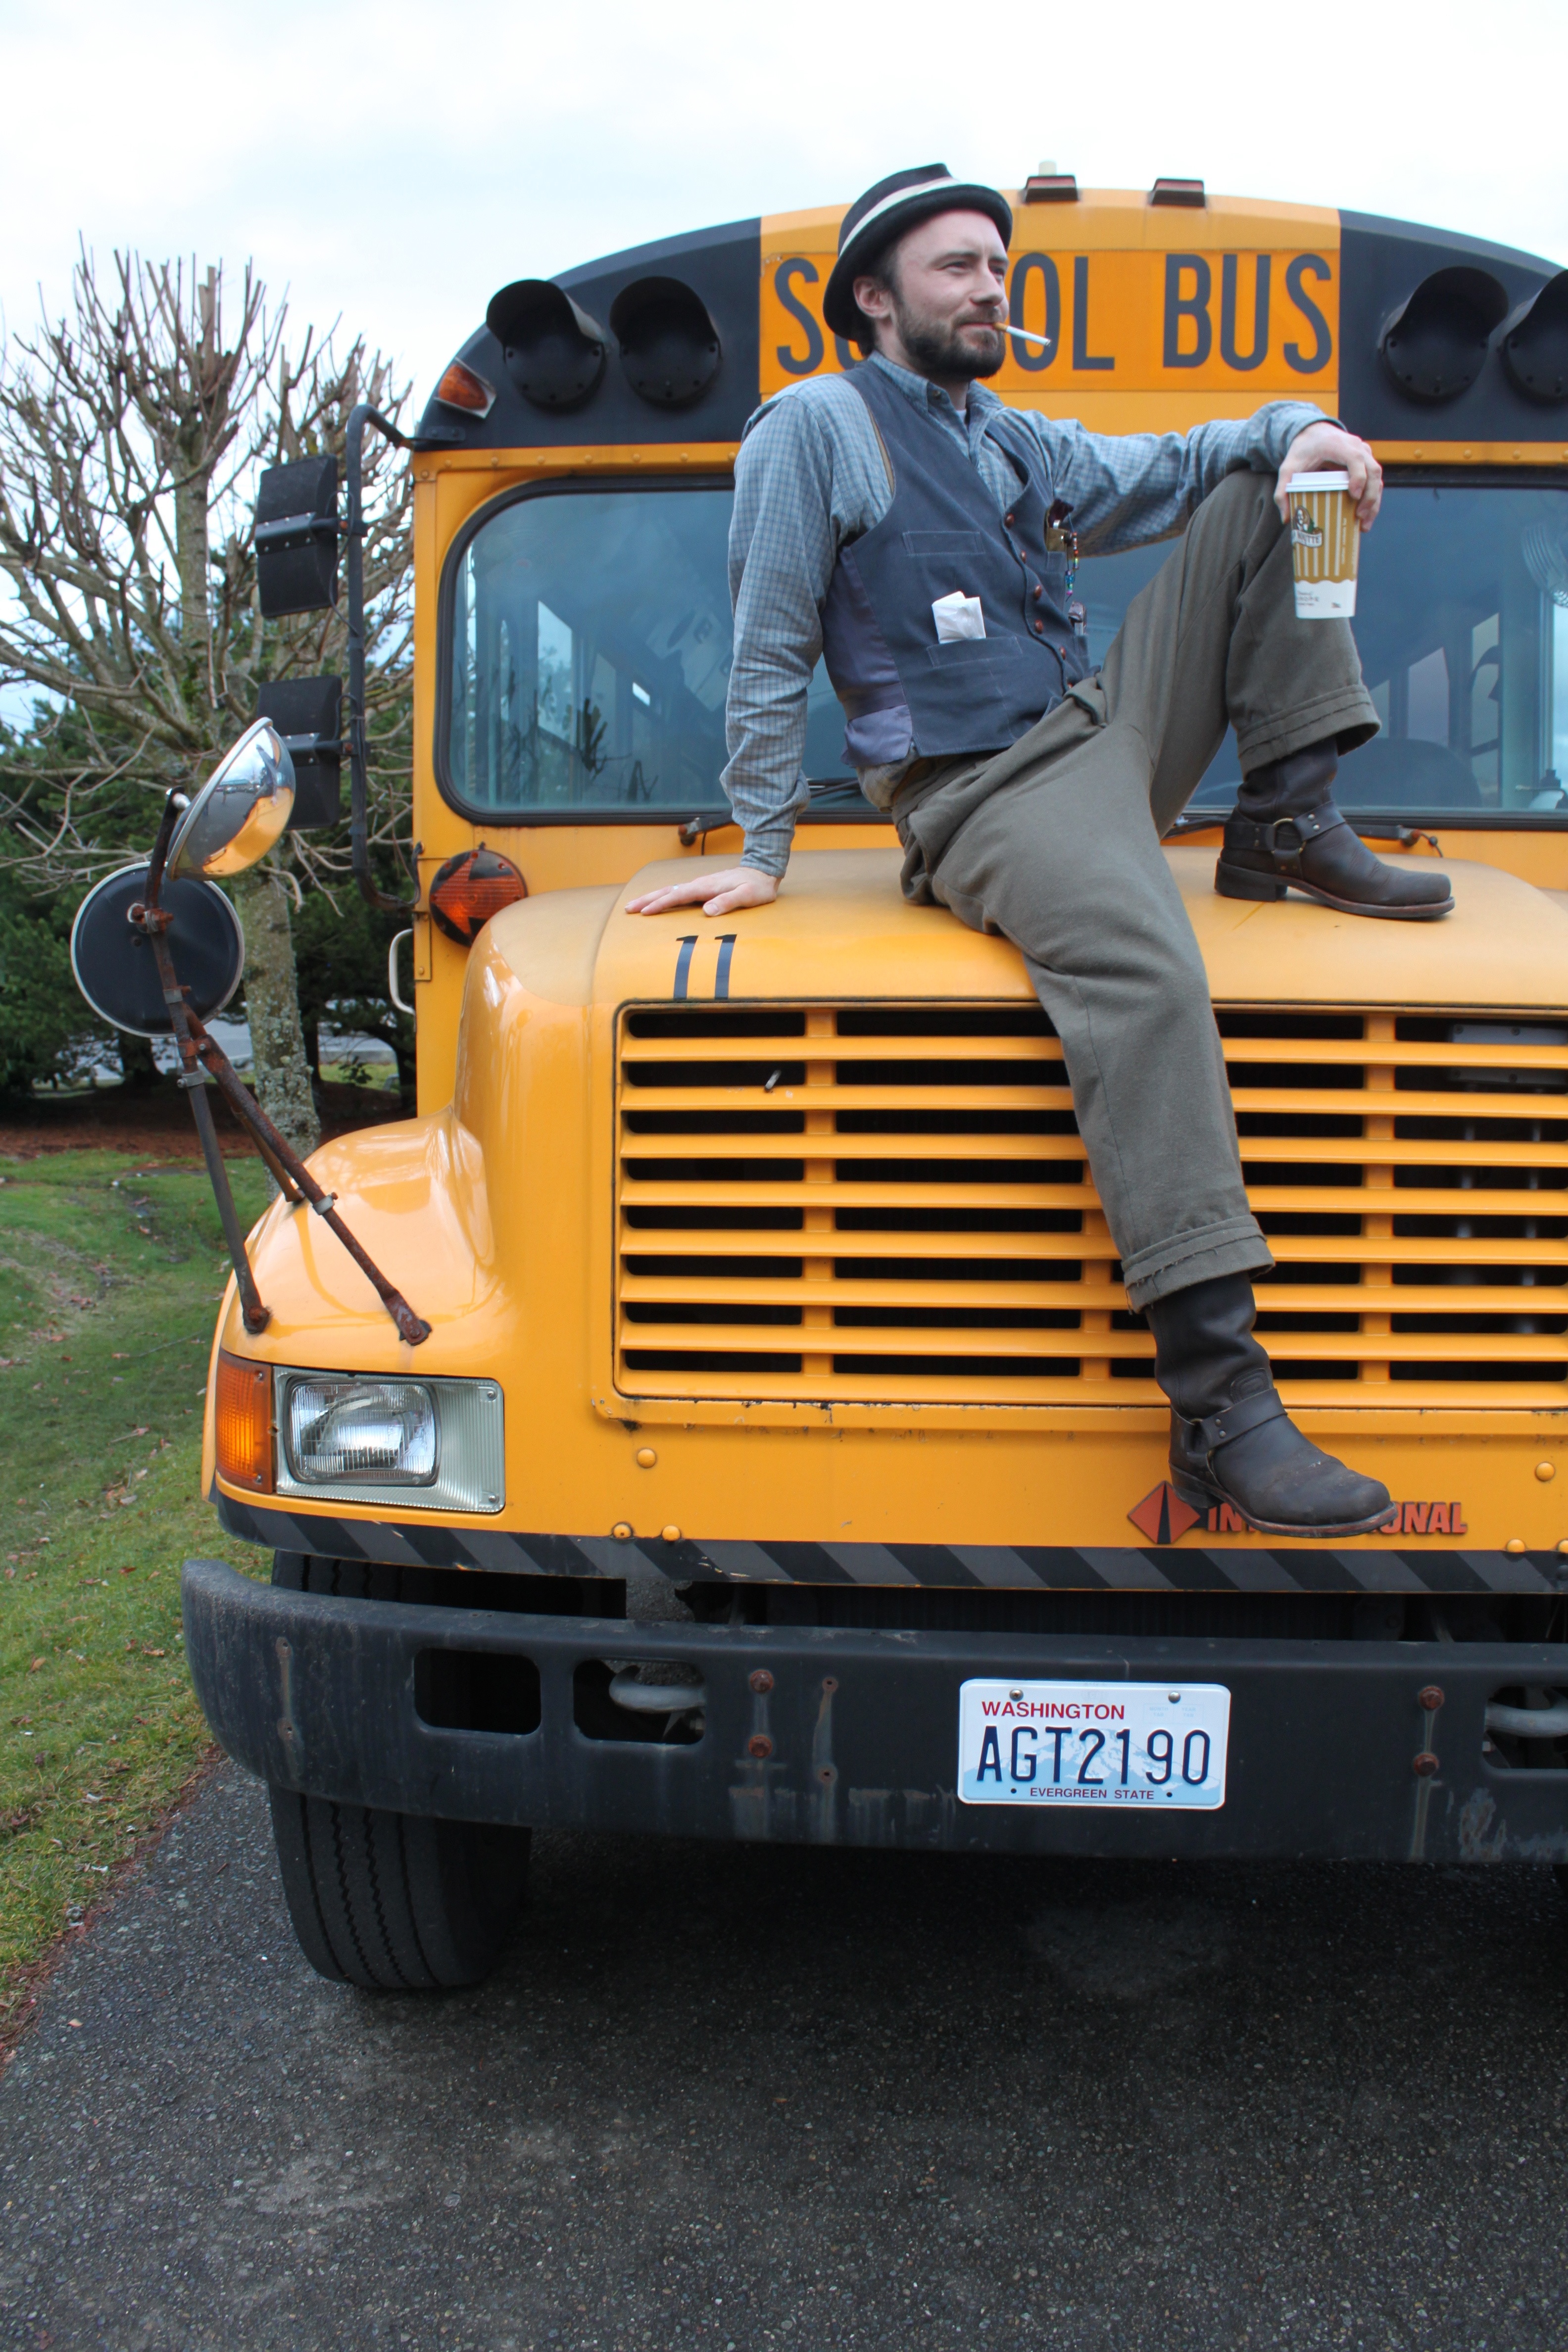 Seattle to Portland: Craigslist Rideshare in a School Bus ...